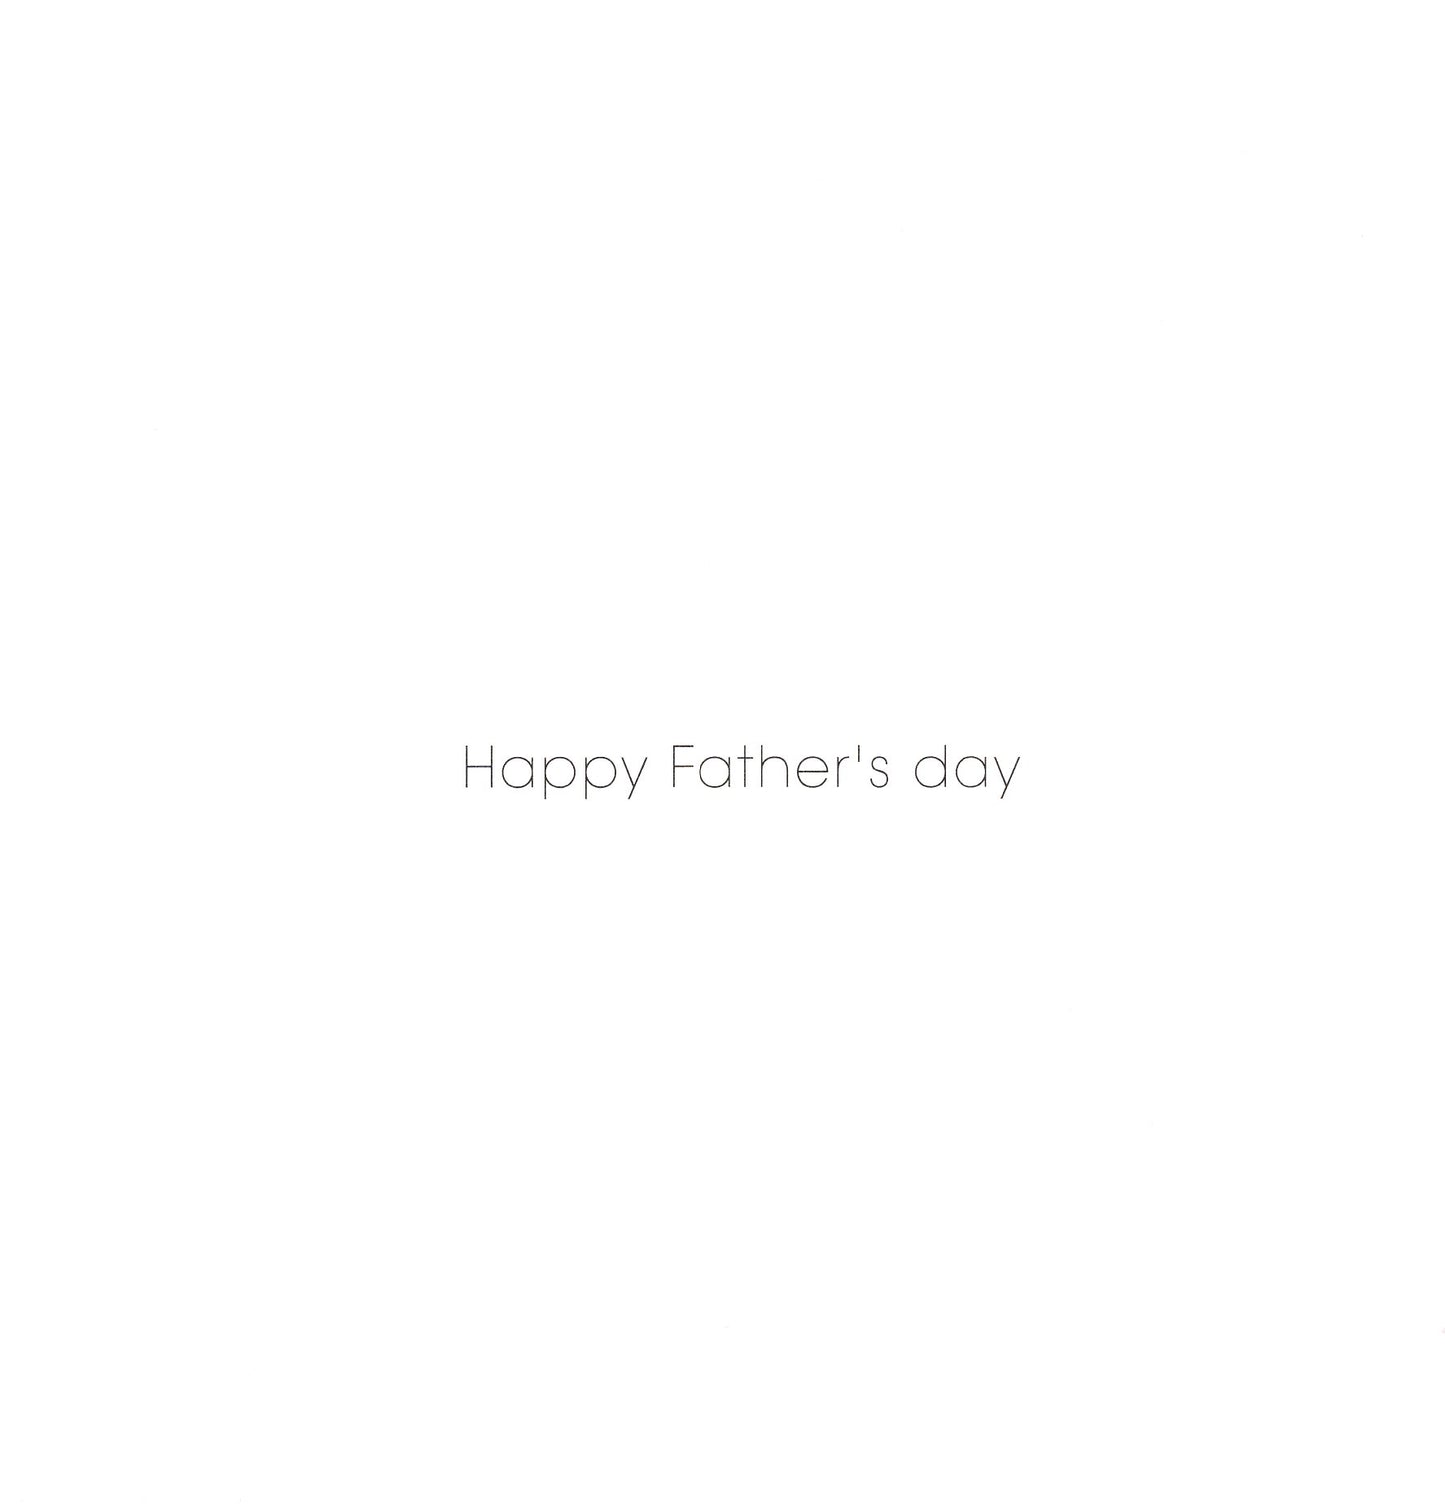 Cute Daddy Look Up To You Happy Father's Day Greeting Card